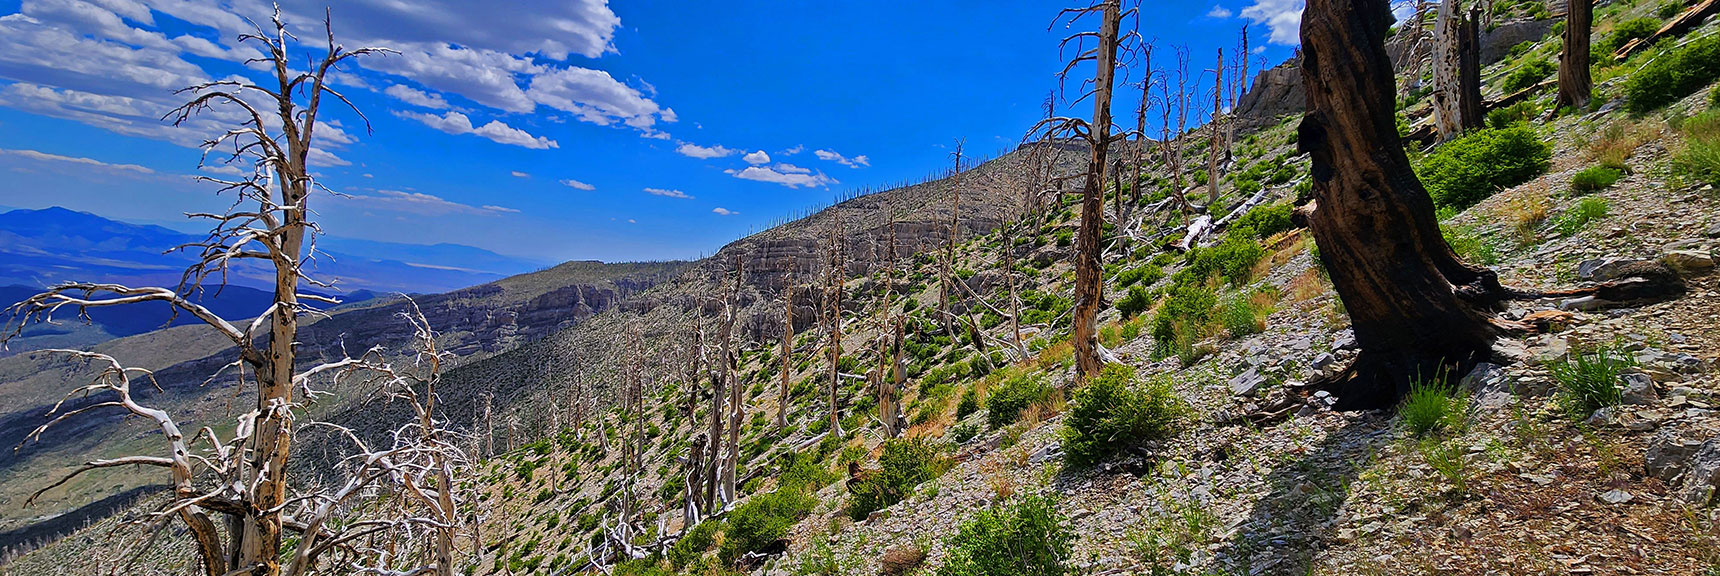 Now Back on East (Left) Side of Ridge. Greater Incline, More Rugged, But Trail Continues. | Fletcher Canyon Trailhead to Harris Mountain Summit to Griffith Peak Summit Circuit Adventure | Mt. Charleston Wilderness, Nevada